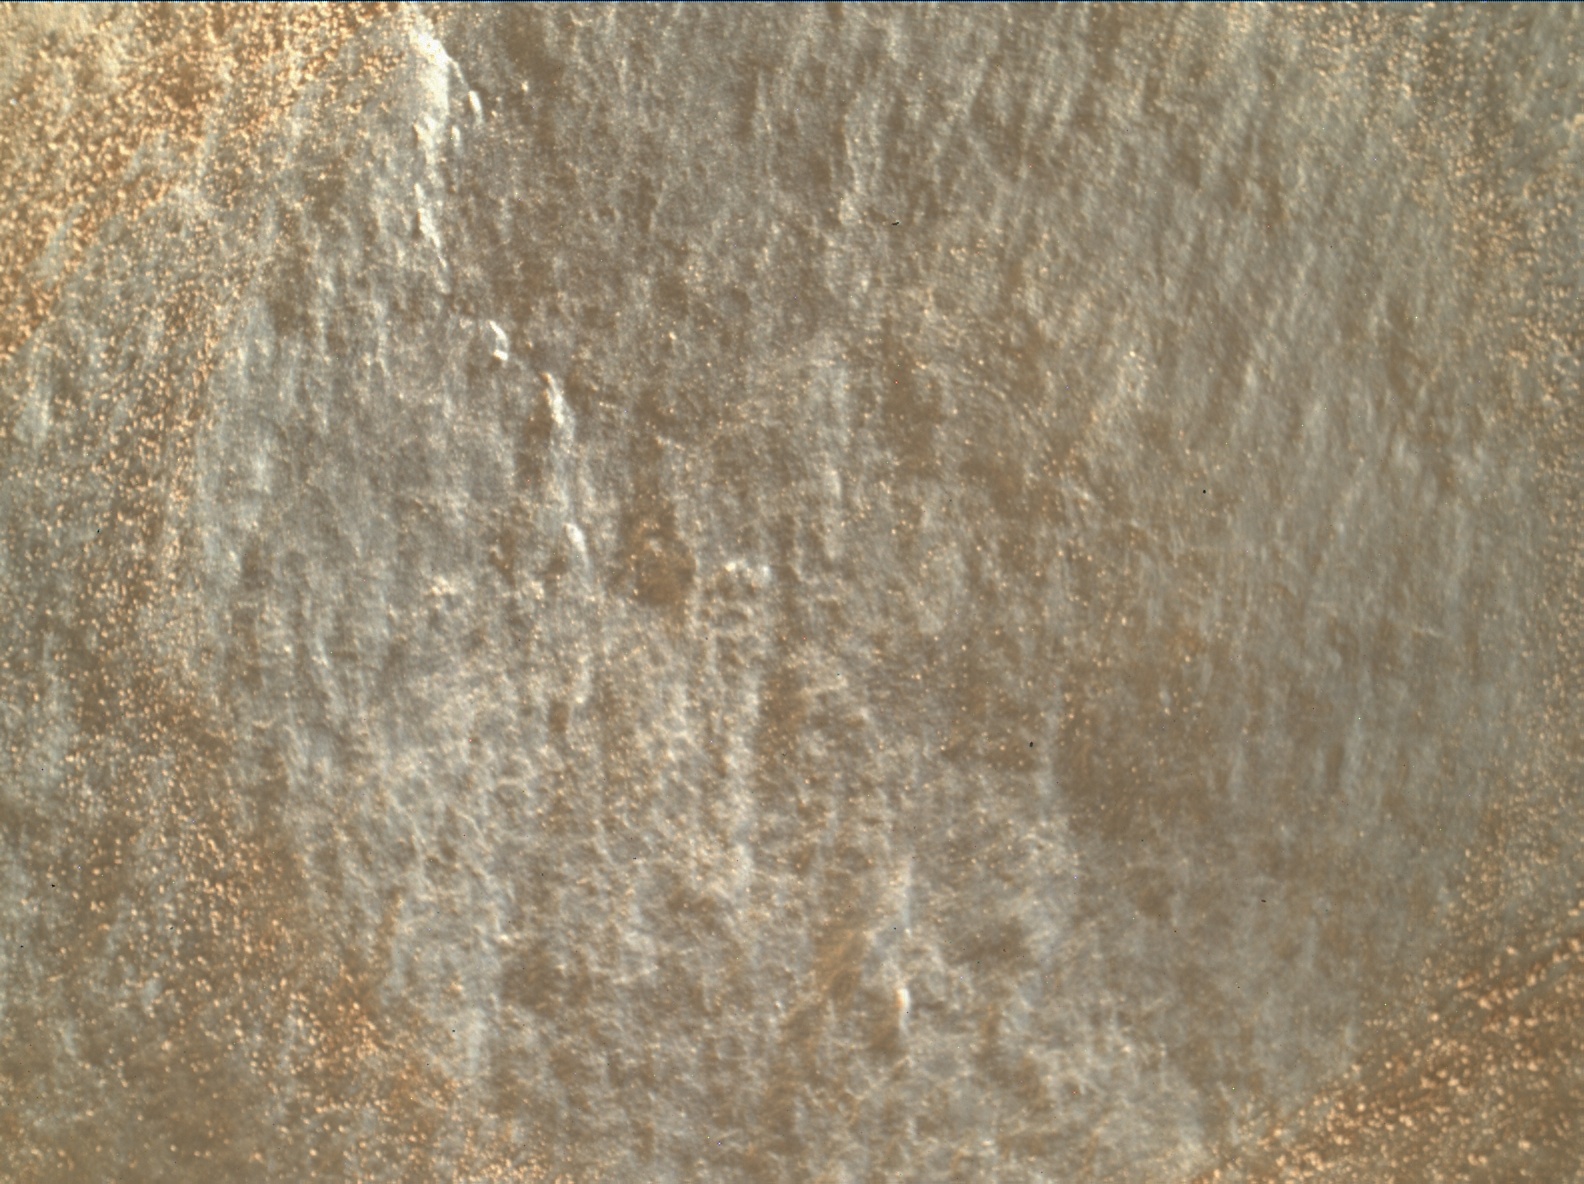 Nasa's Mars rover Curiosity acquired this image using its Mars Hand Lens Imager (MAHLI) on Sol 3422